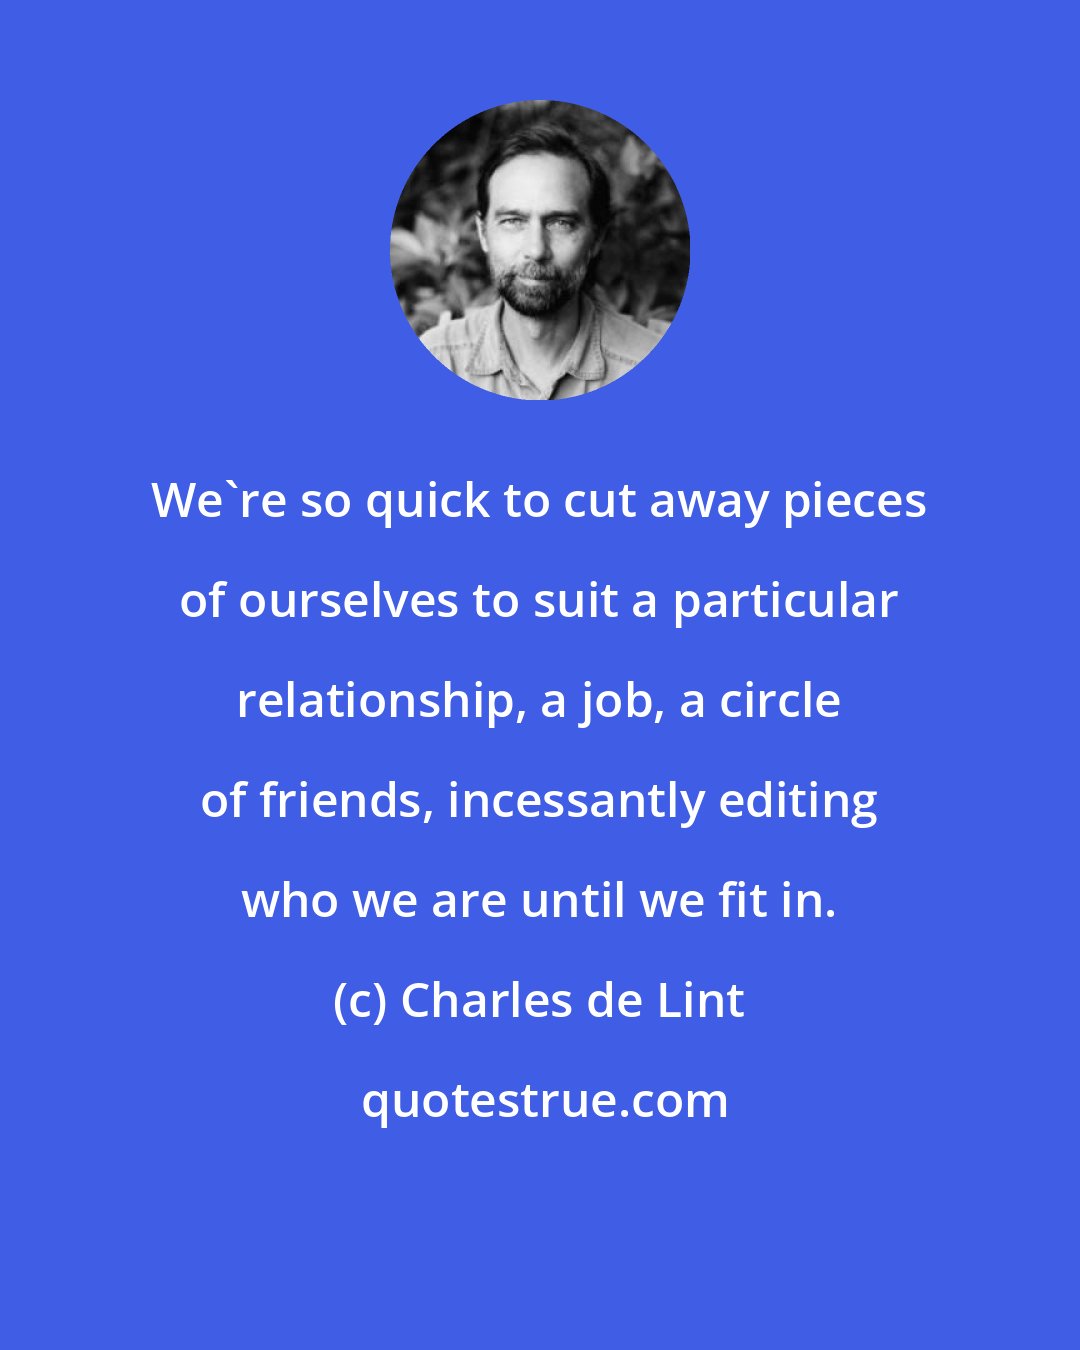 Charles de Lint: We're so quick to cut away pieces of ourselves to suit a particular relationship, a job, a circle of friends, incessantly editing who we are until we fit in.